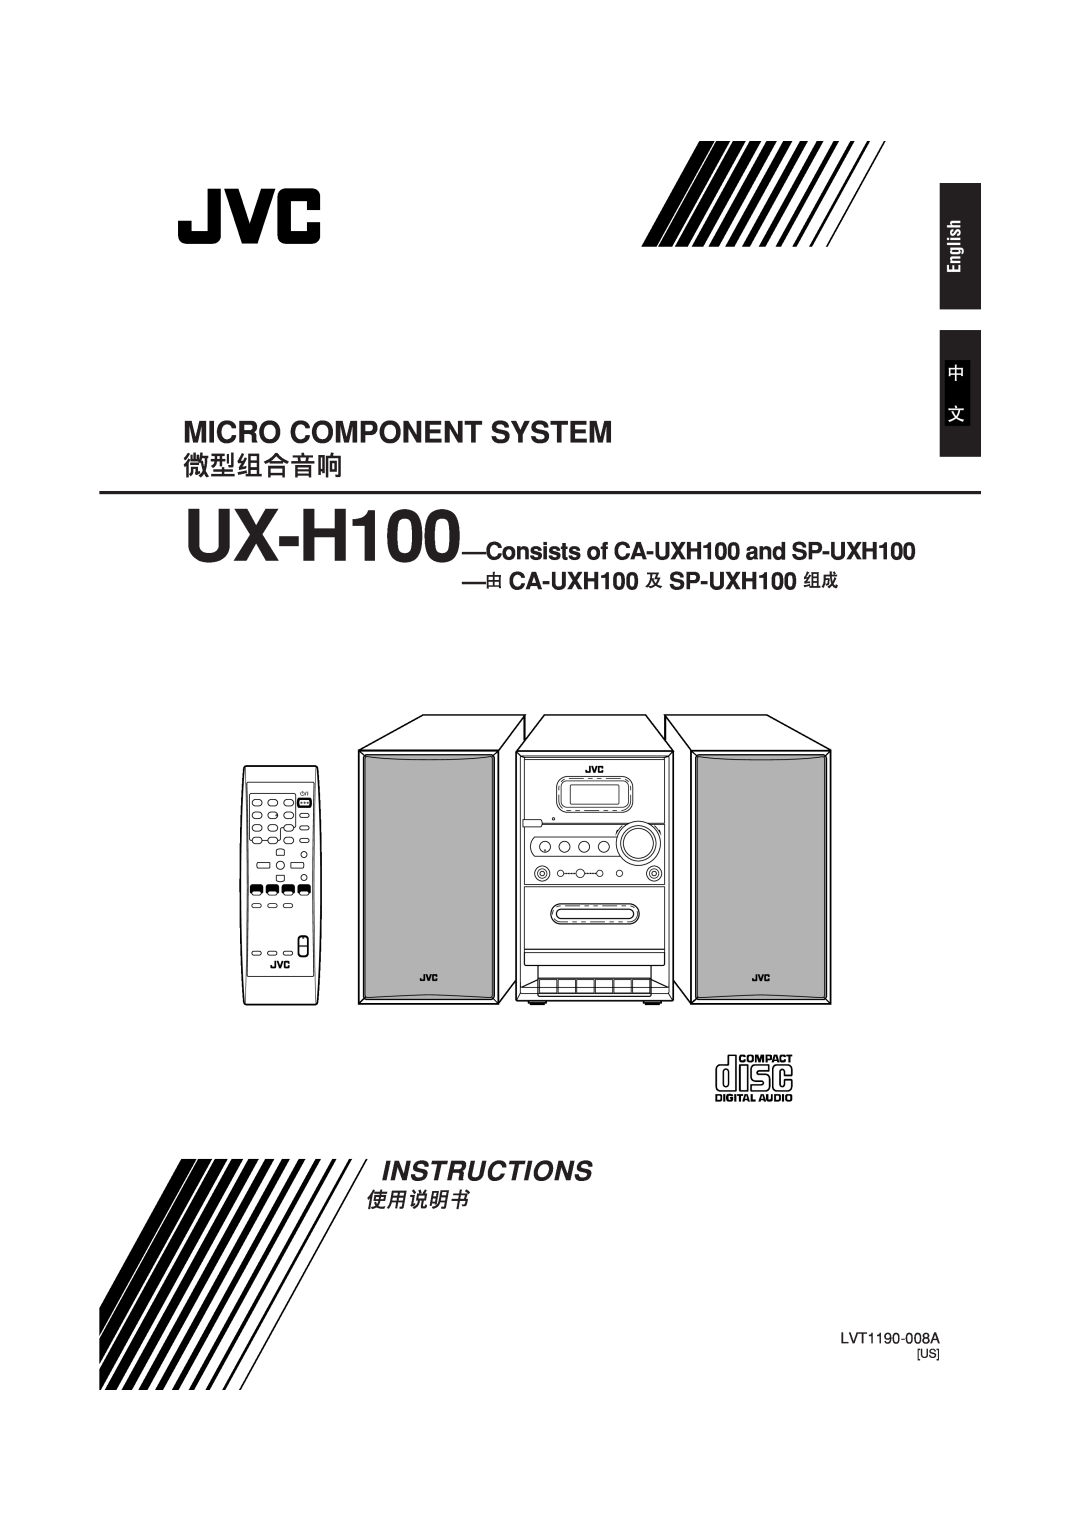 JVC manual Micro Component System, Instructions, UX-H100—Consistsof CA-UXH100and SP-UXH100, CA-UXH100 SP-UXH100, English 